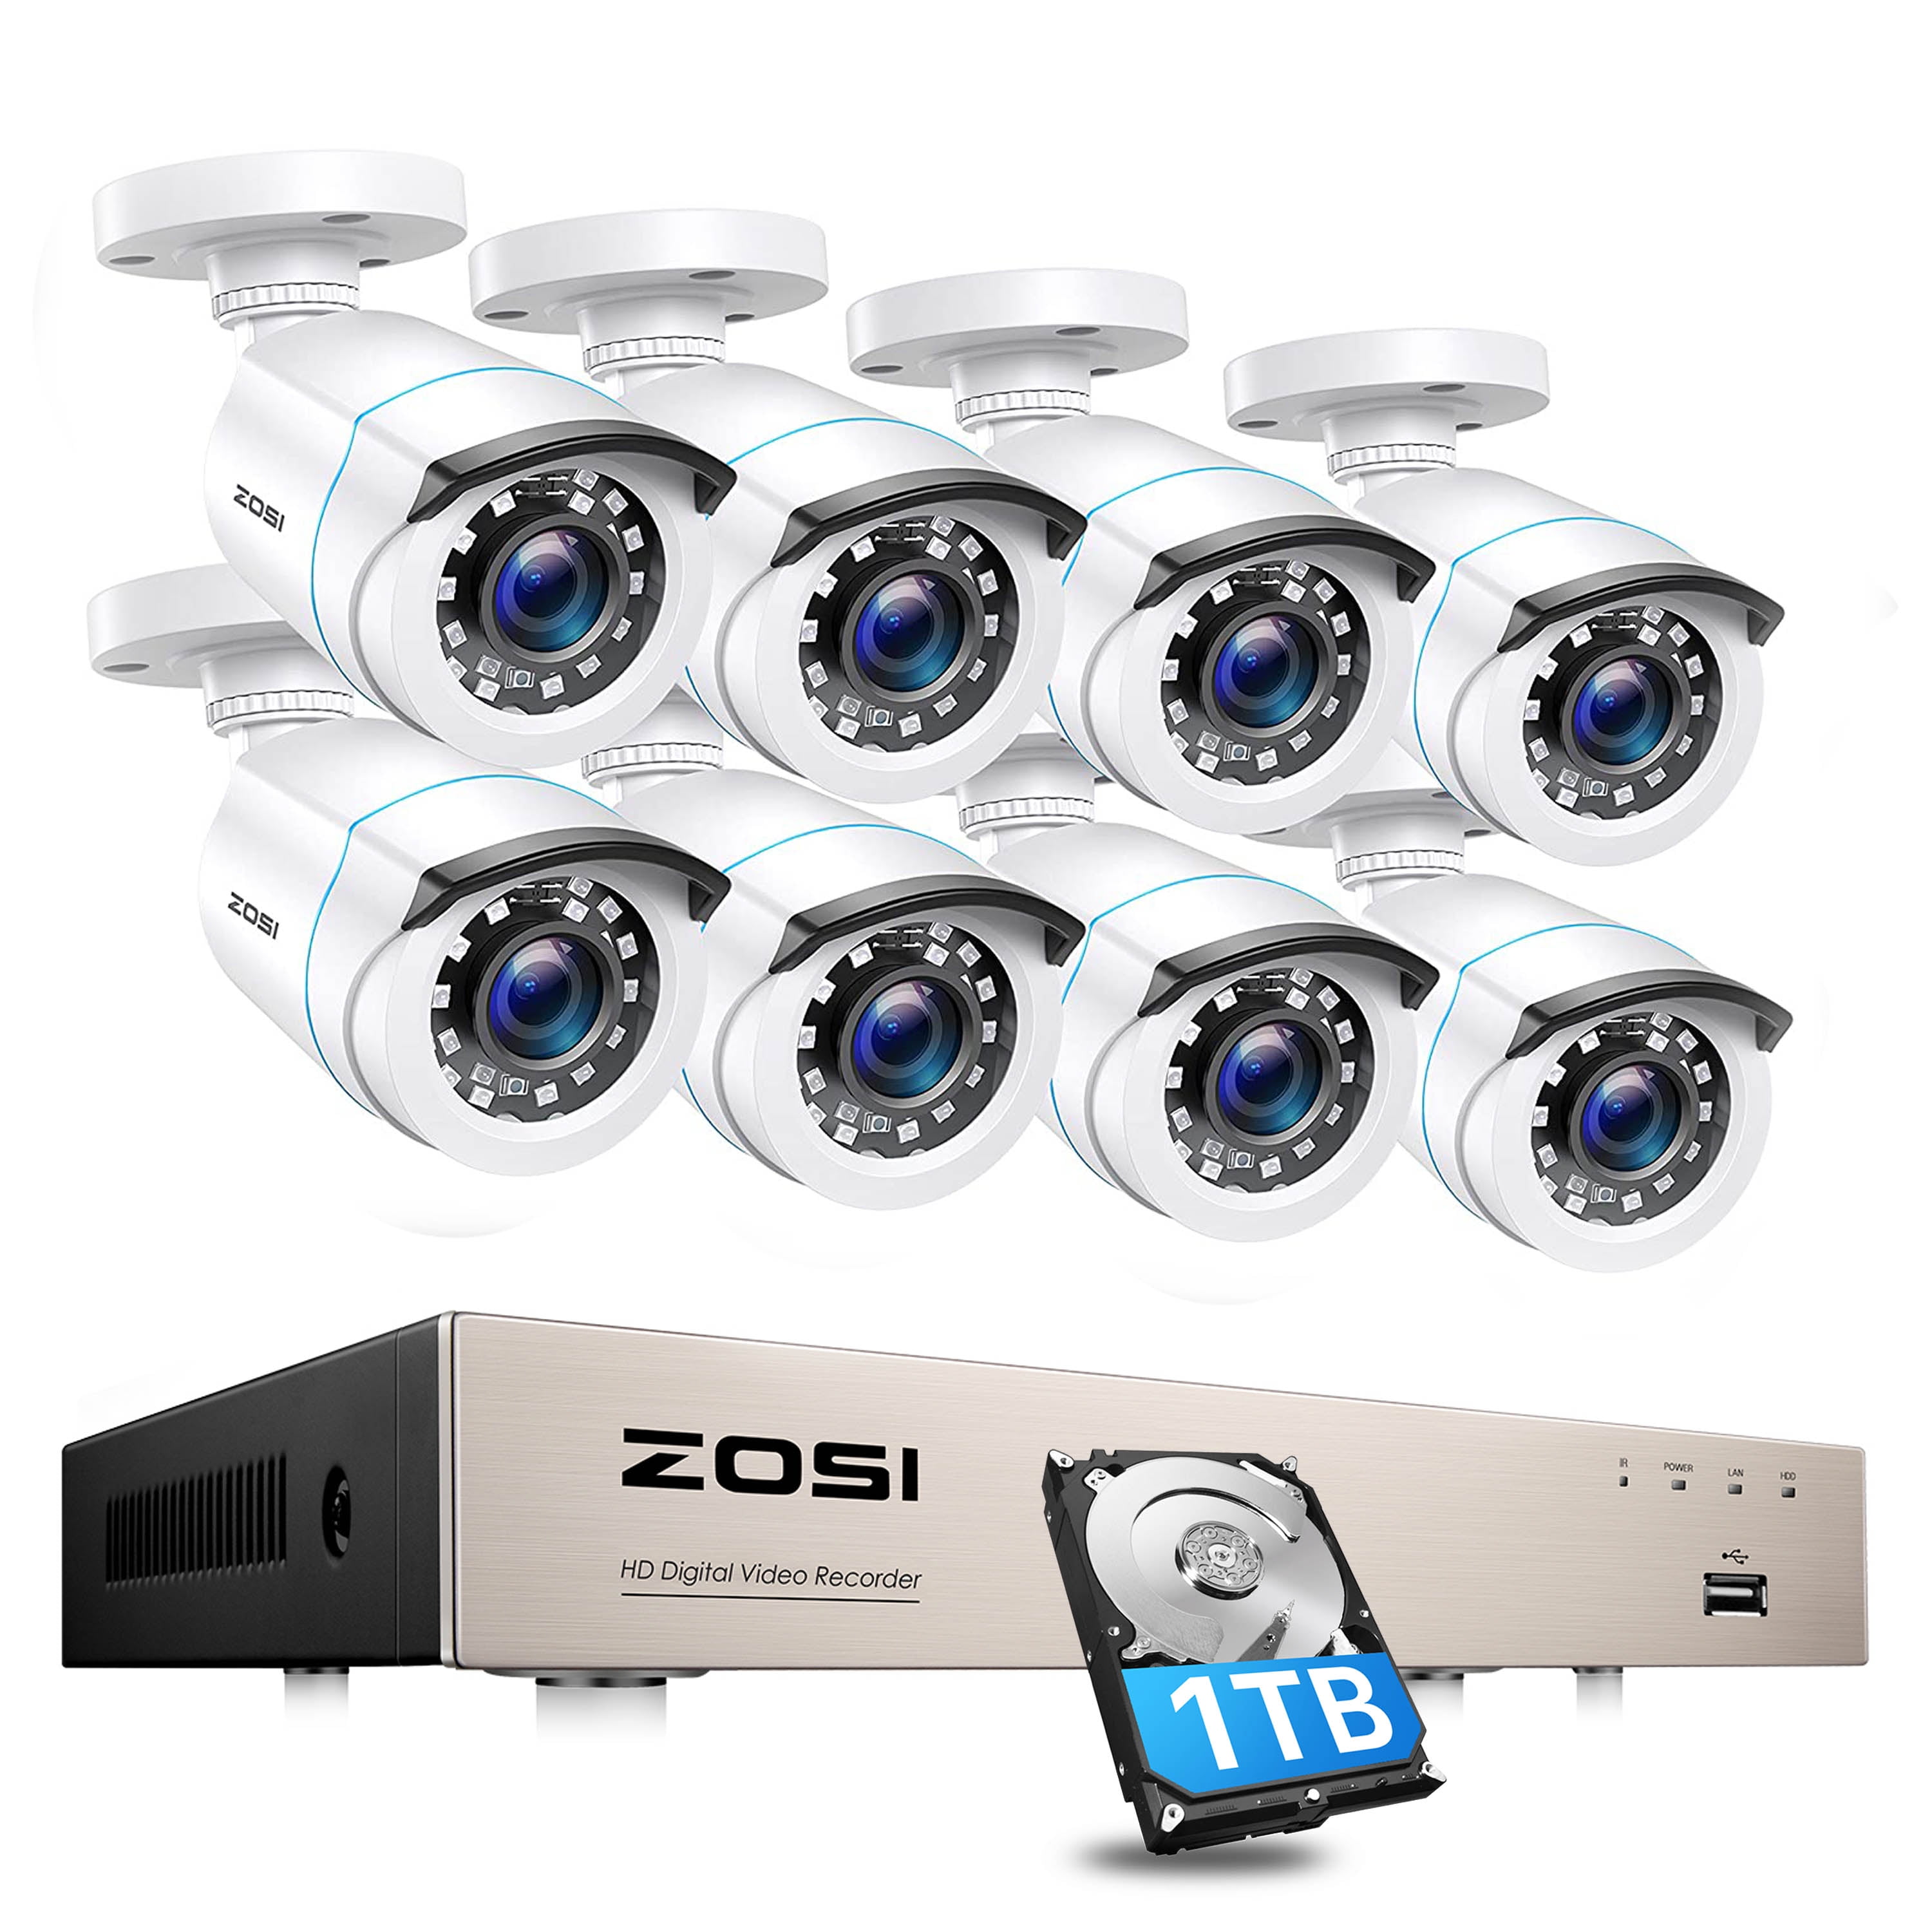 ZOSI 8CH 1080P CCTV 2TB 3000TVL 2.0MP Outdoor Bullet Home Security Camera System 